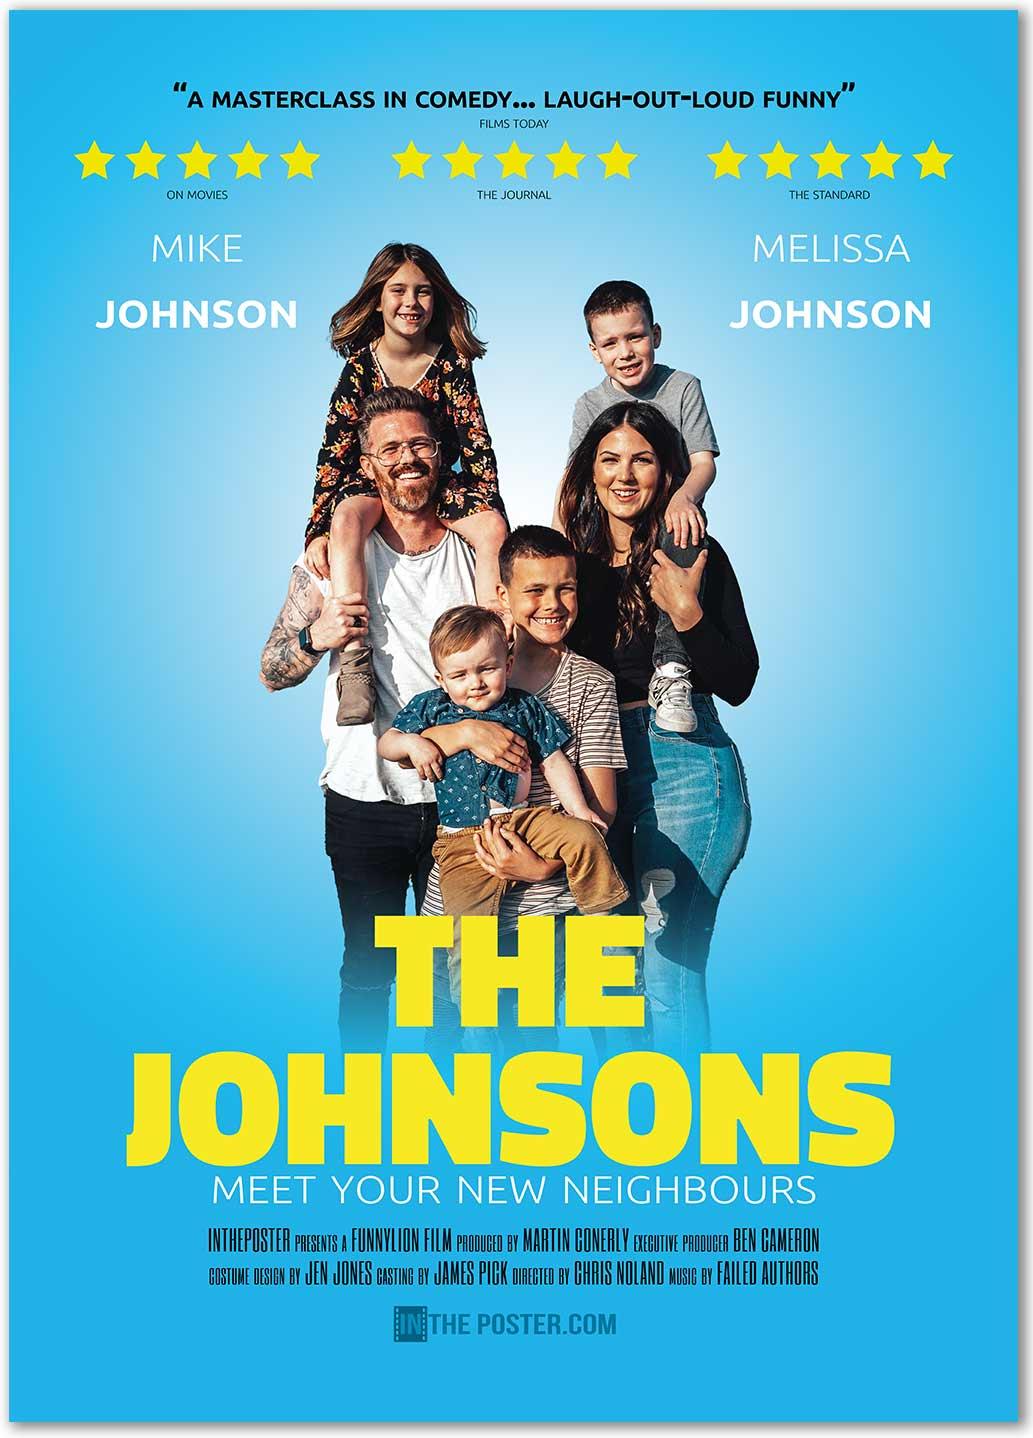 A comedy movie poster with a family photo with kids on their parents shoulders on a blue background